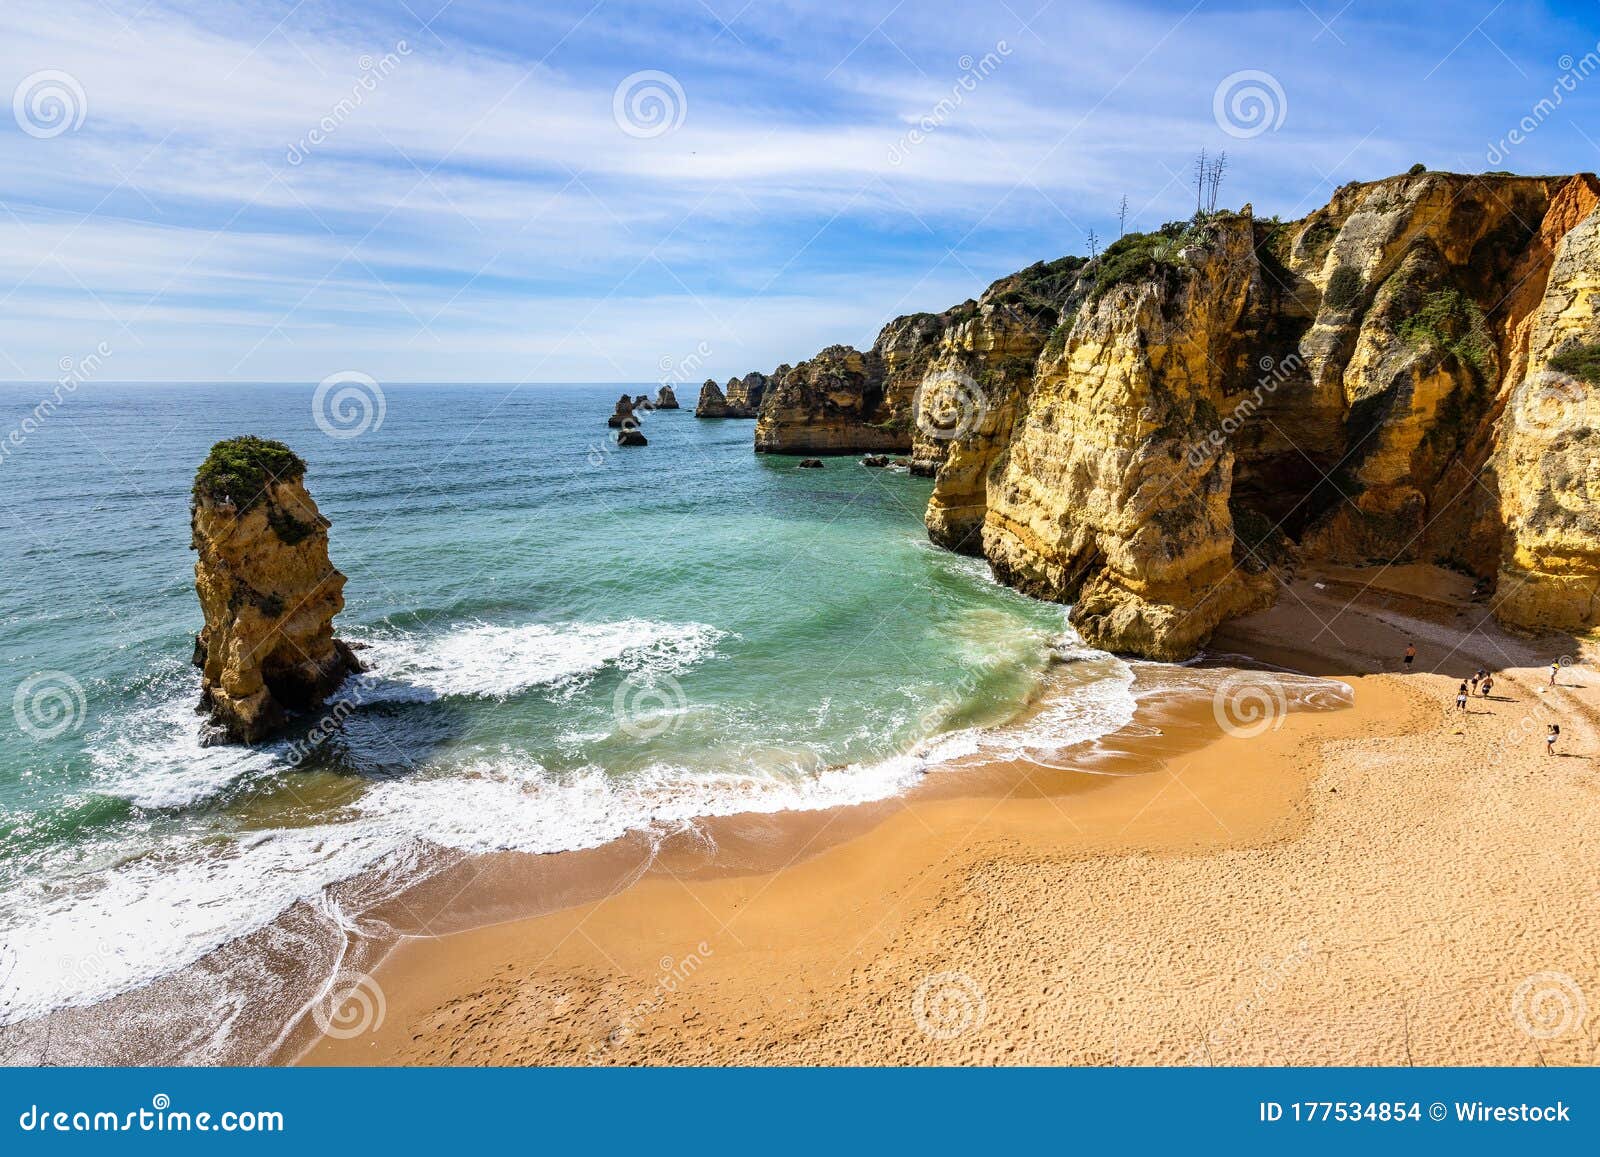 beautiful view of the cliffs and the sea of praia dos estudiantes in algarve, portugal